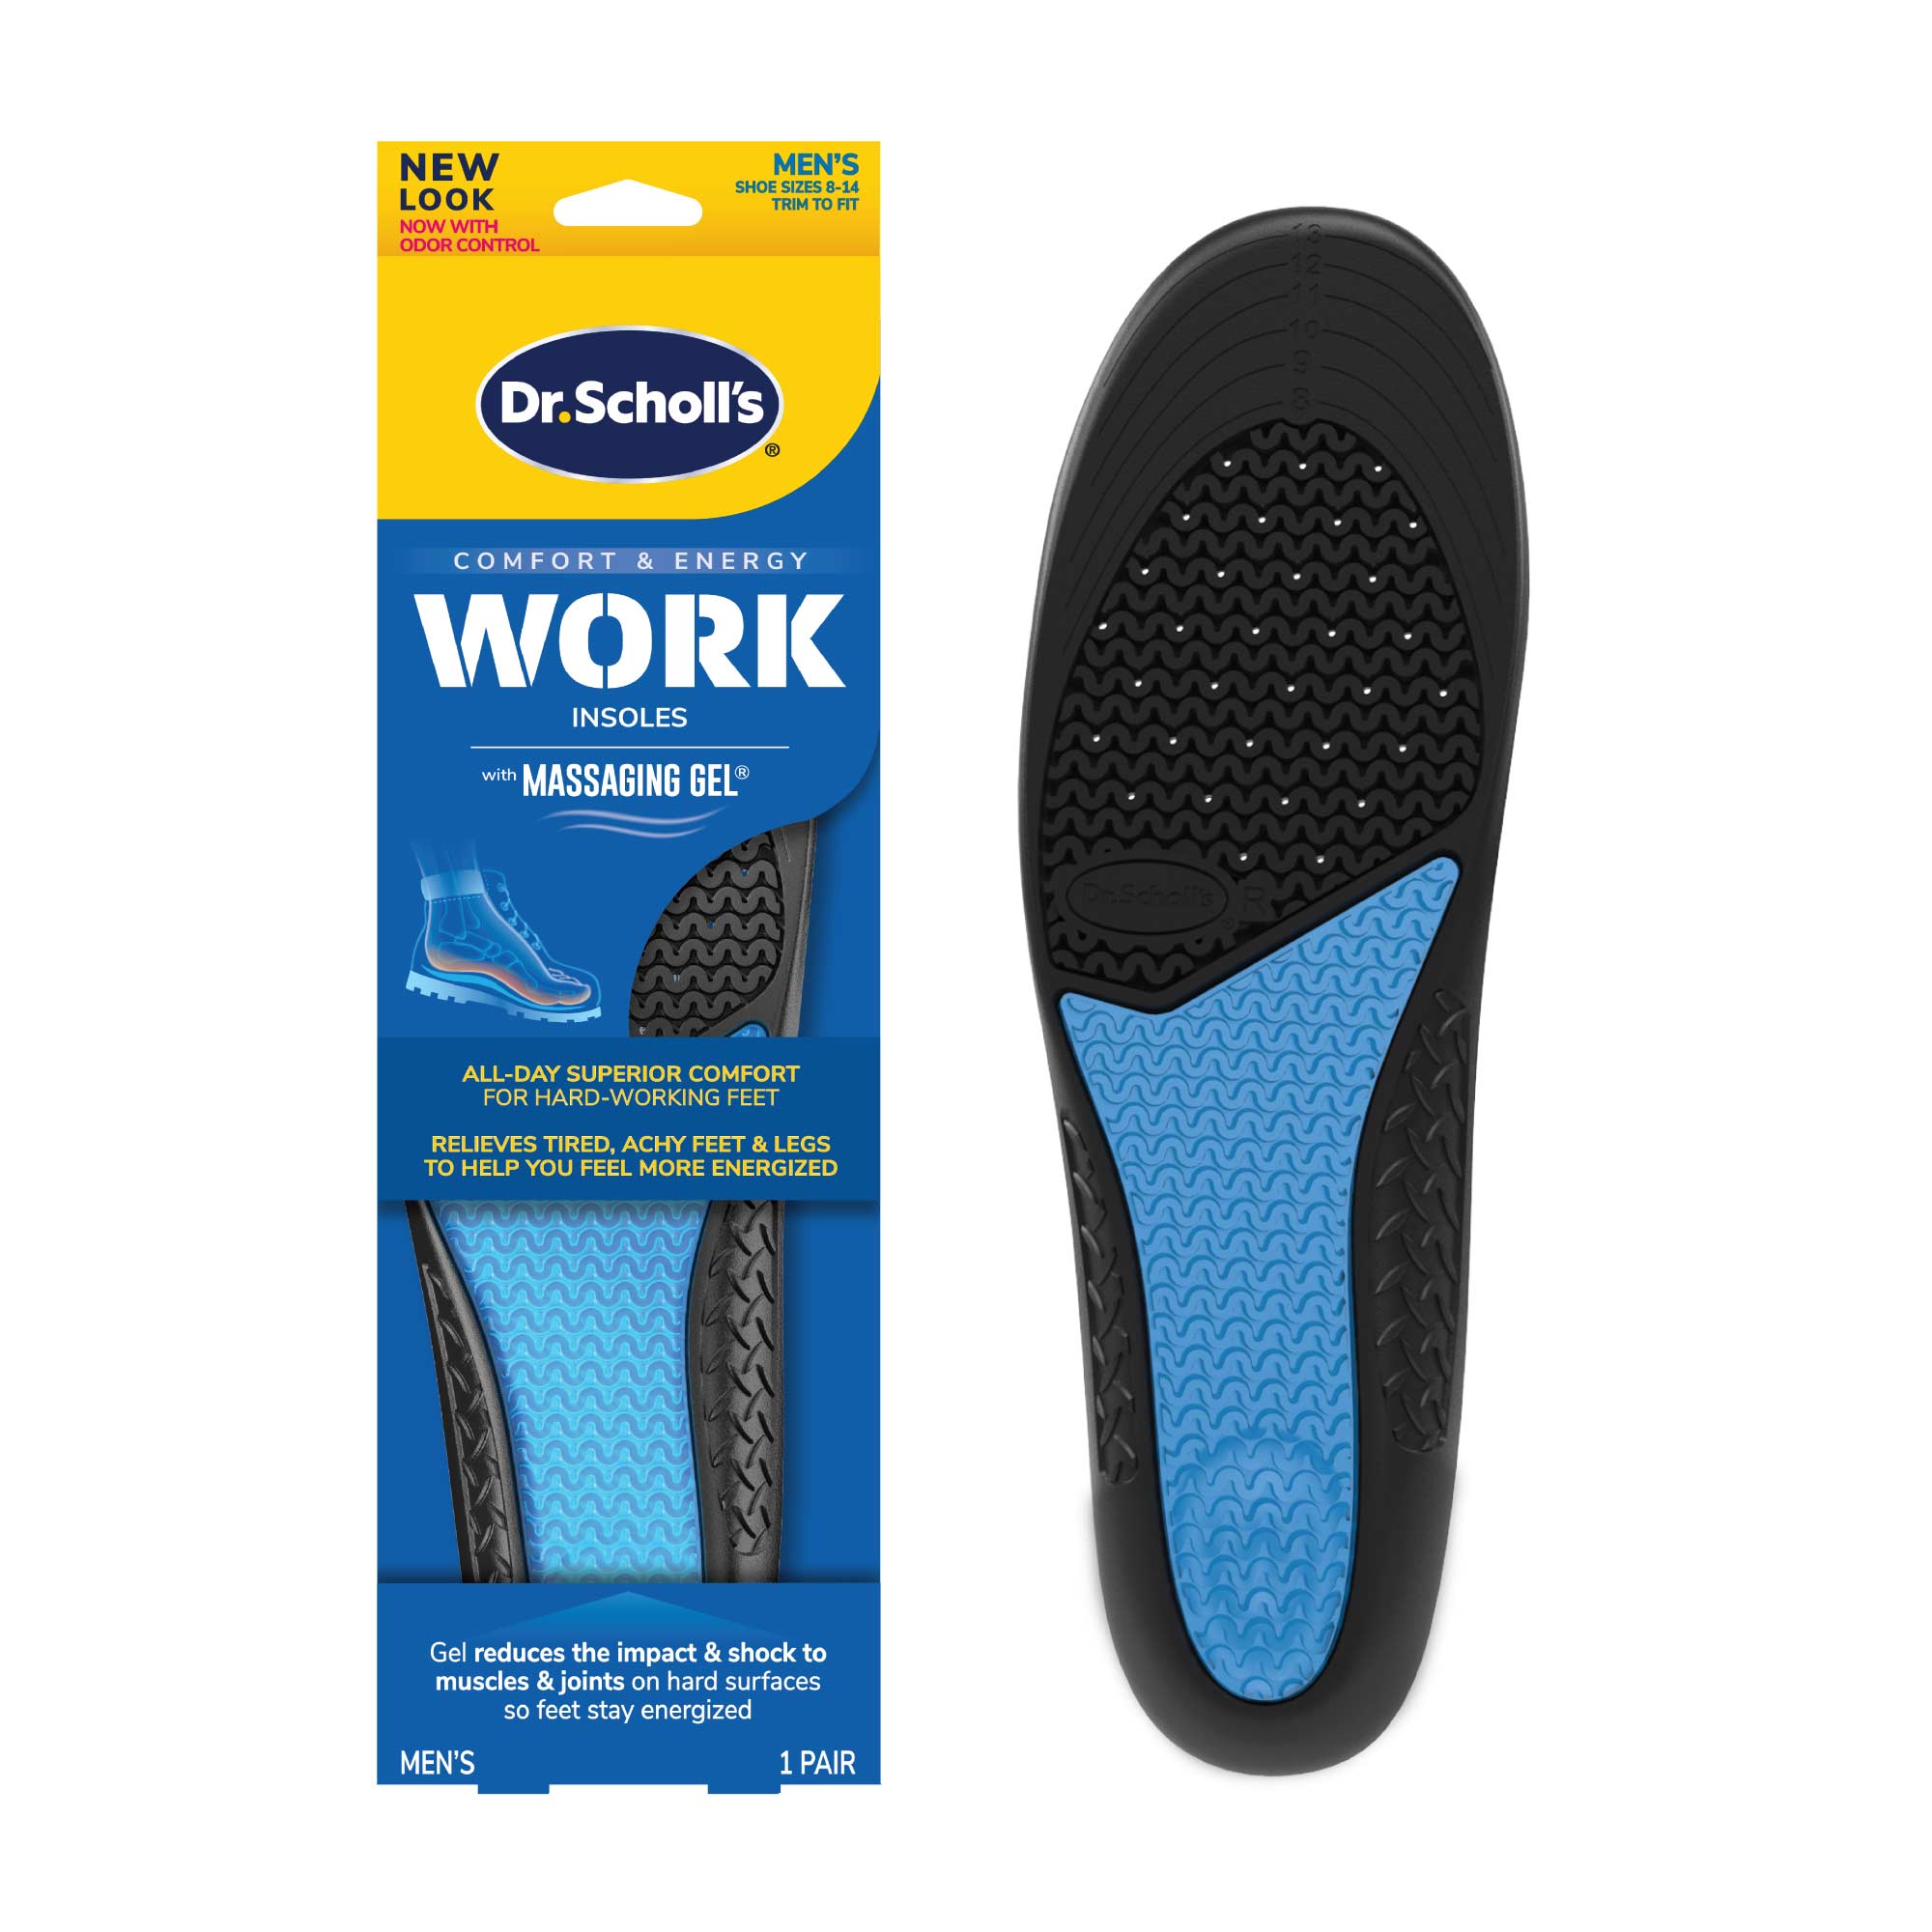 size 8 insoles